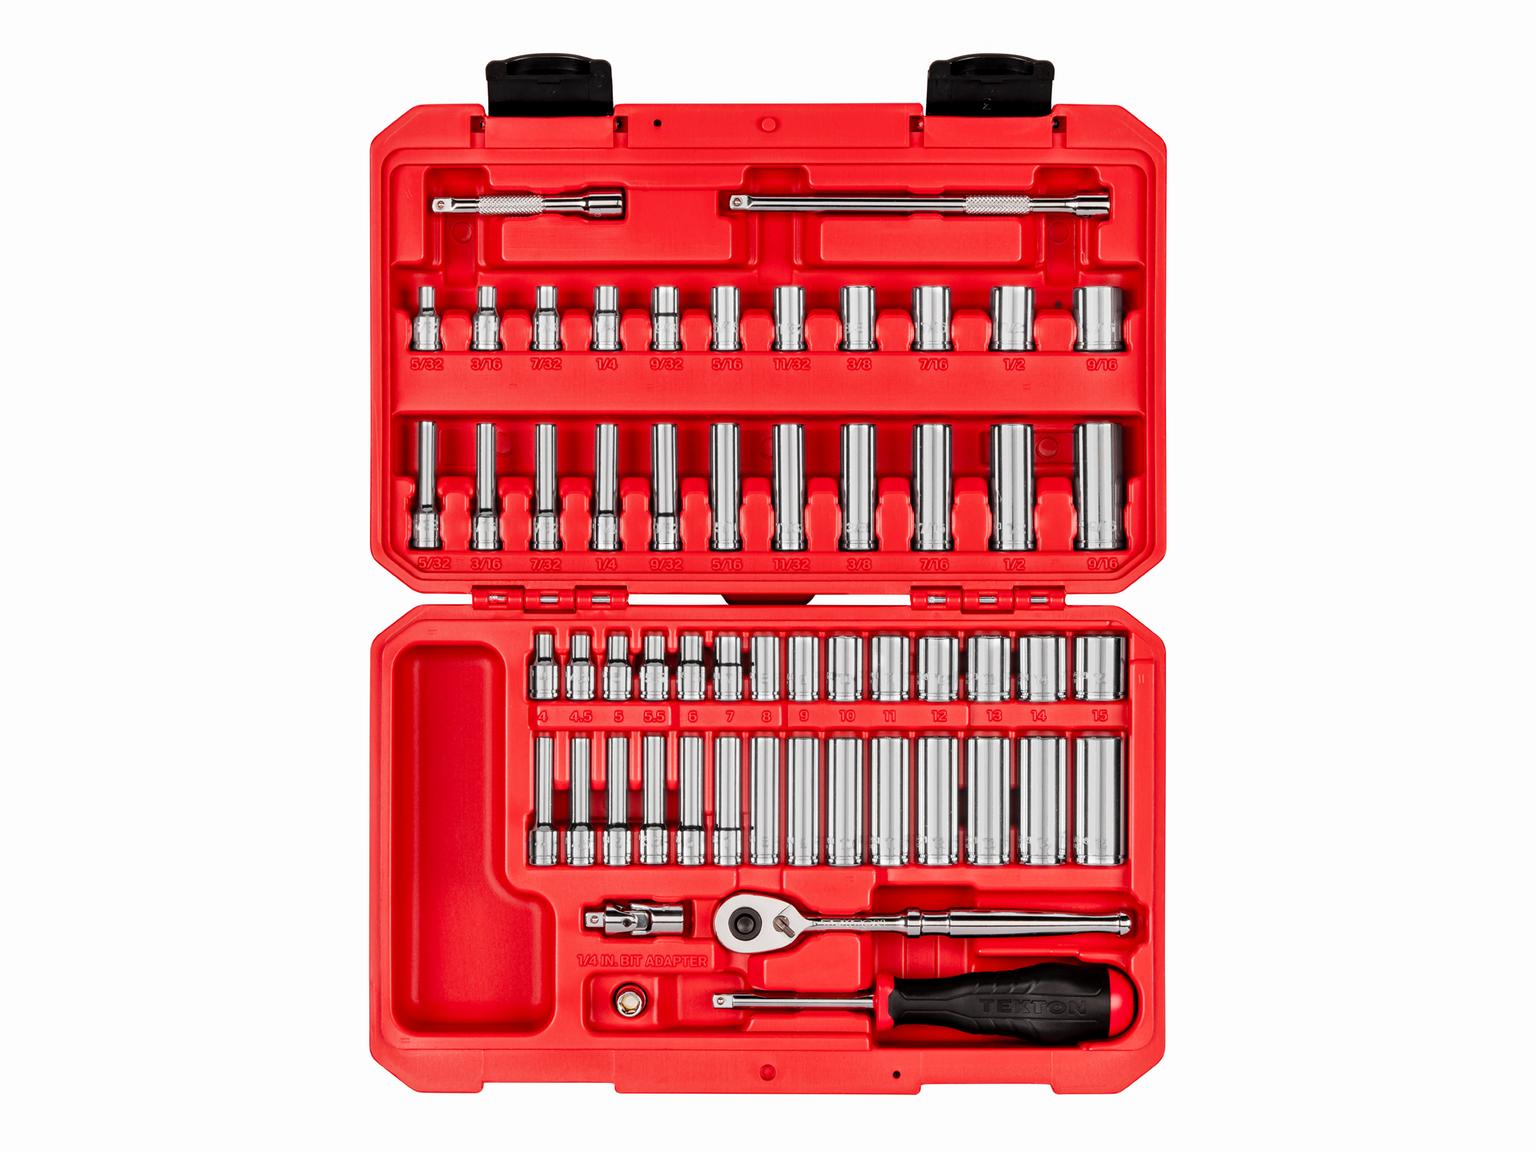 1/4 Inch Drive 6-Point Socket and Ratchet Set, 56-Piece (5/32 - 9/16 in., 4 - 15 mm)